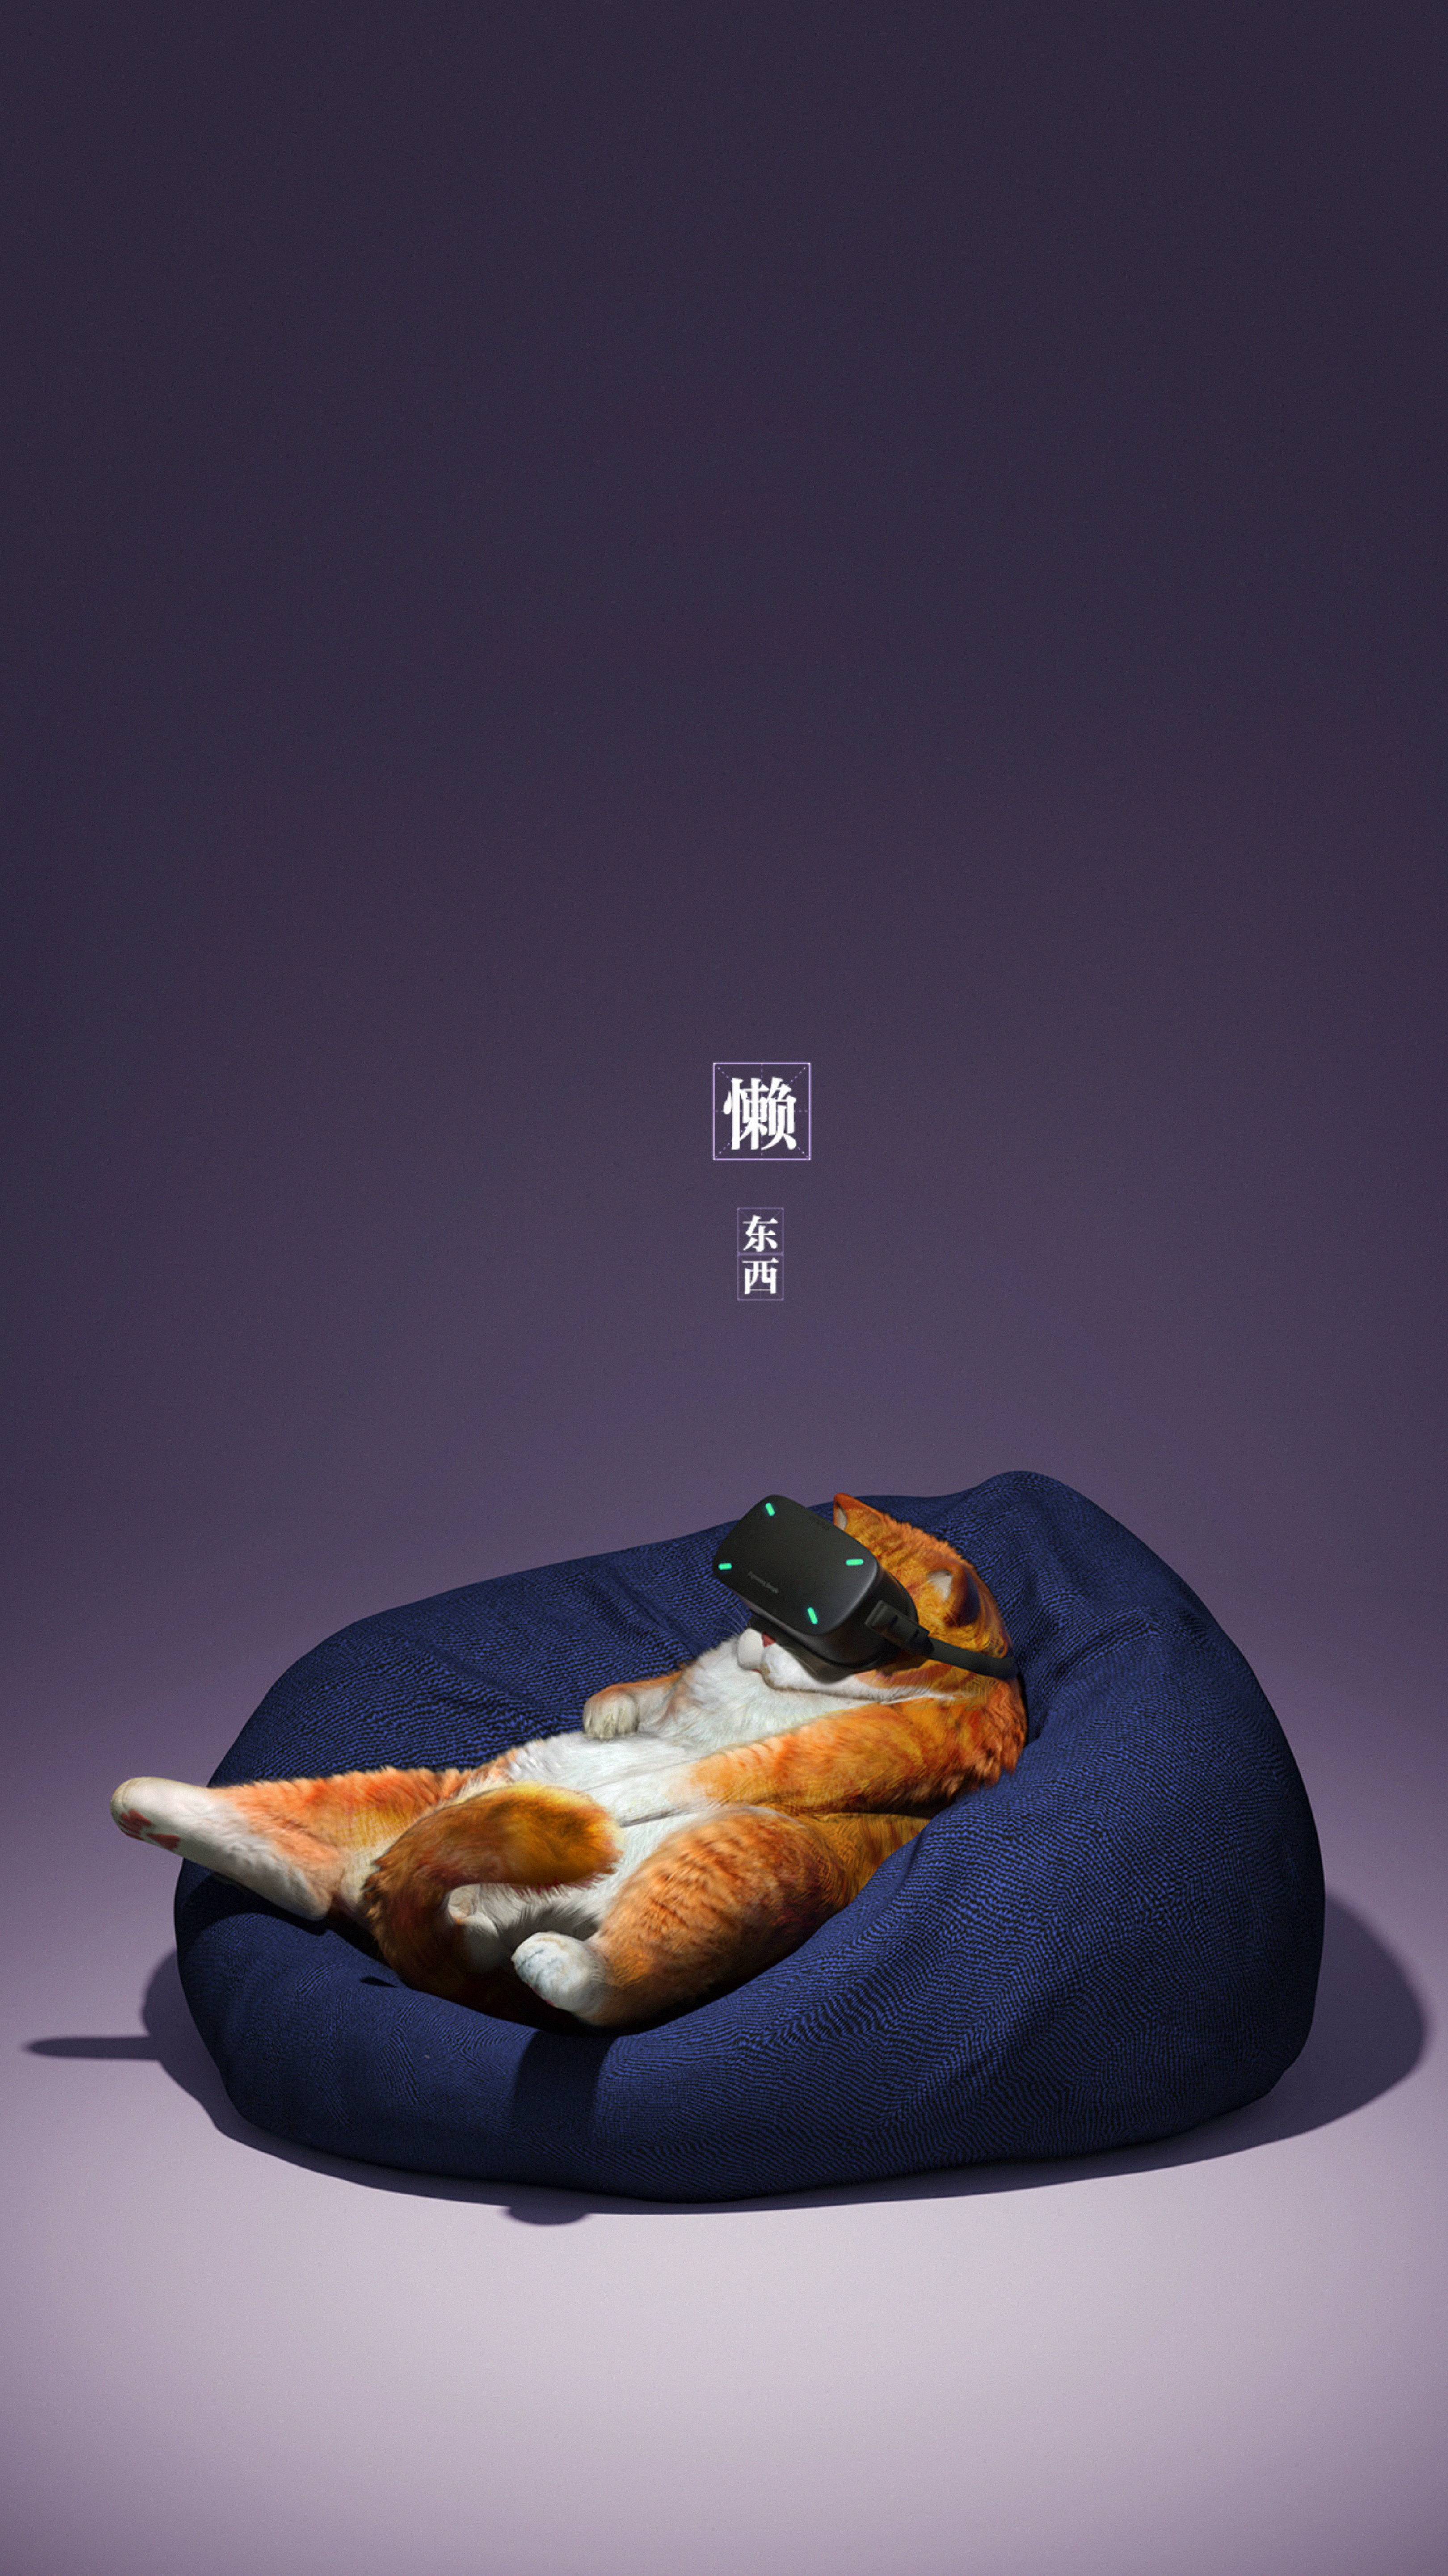 cool, funny, miscellanea, miscellaneous, cat, glasses, spectacles, virtual reality